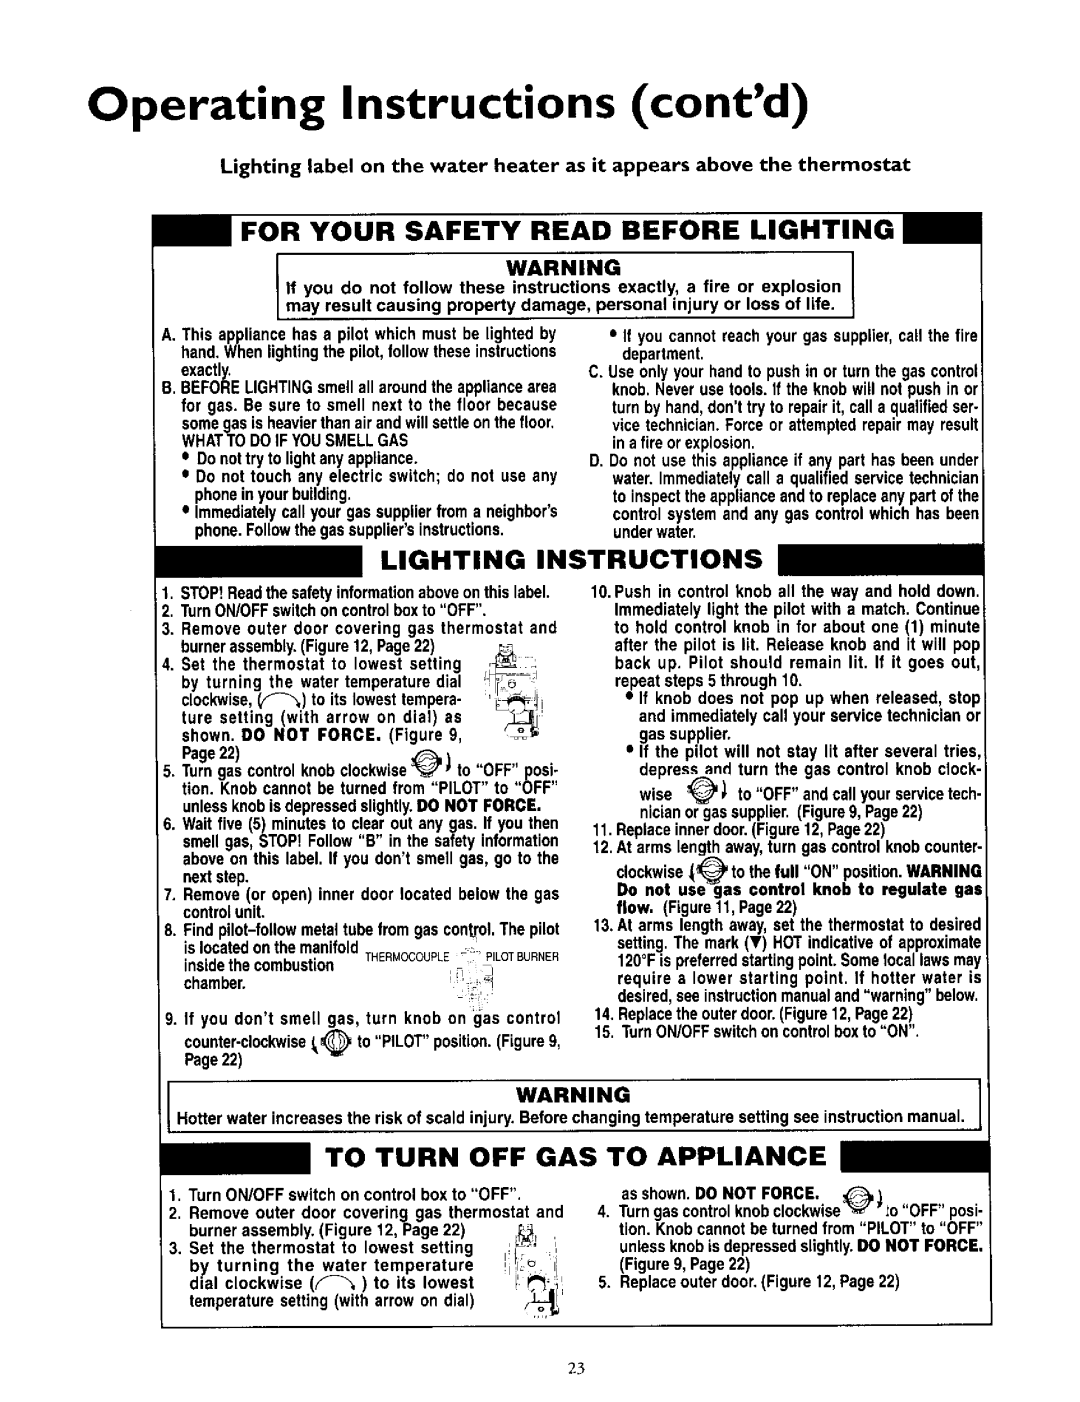 Kenmore 153.335916, L53.335816 Operating Instructions contd, For Your Safety Read Before Lighting, Lighting Instructions 